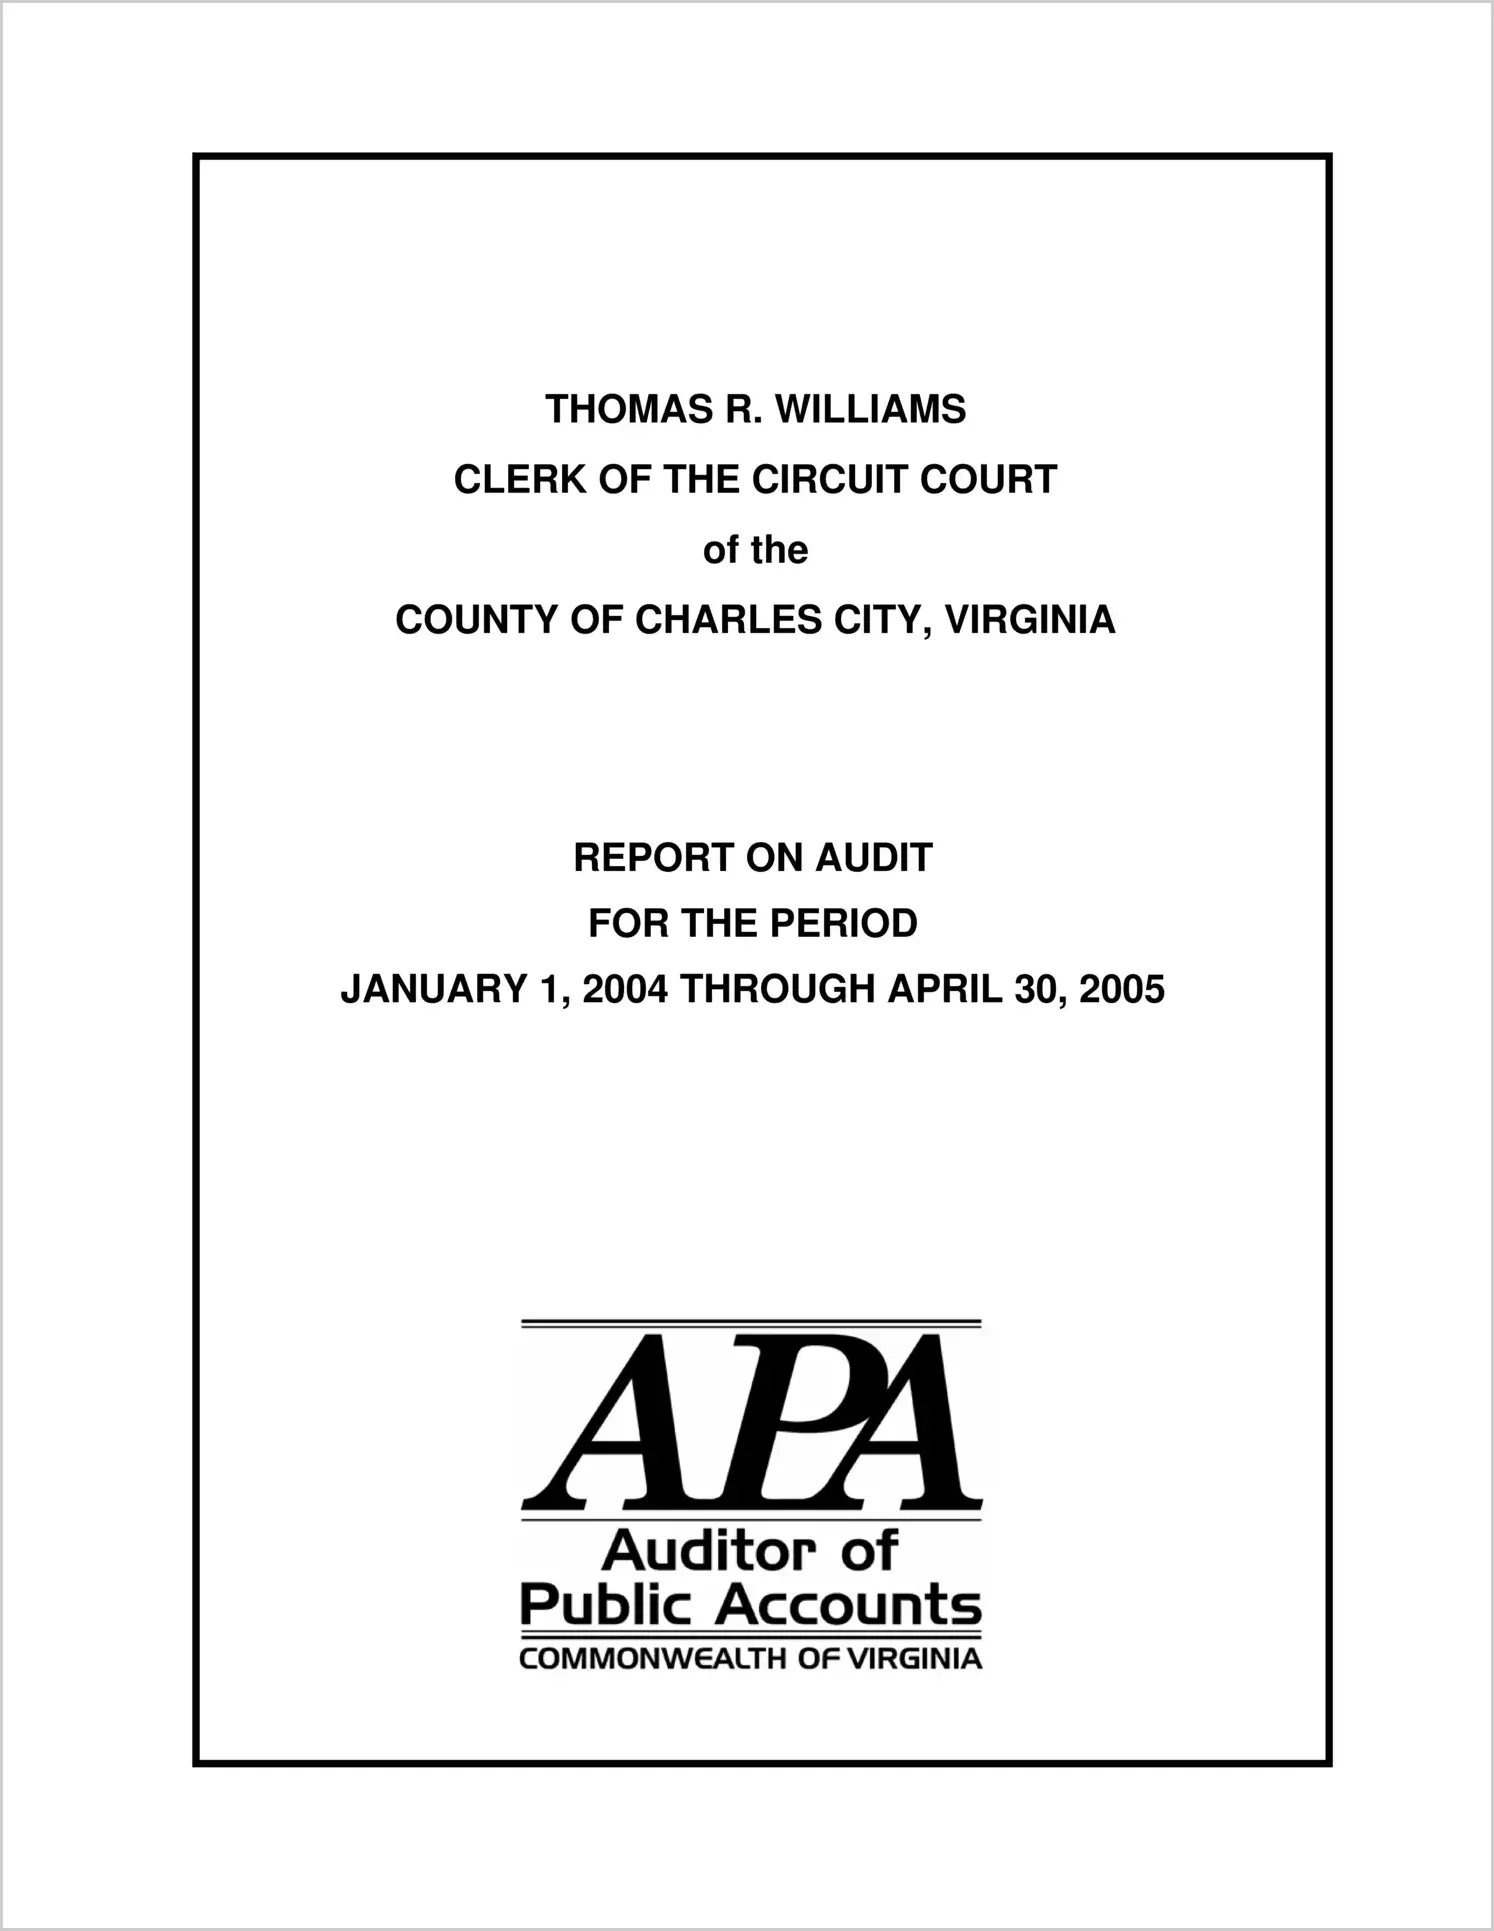 Clerk of the Circuit Court of the County of Charles City for the period January 1, 2004 through April 30, 2005